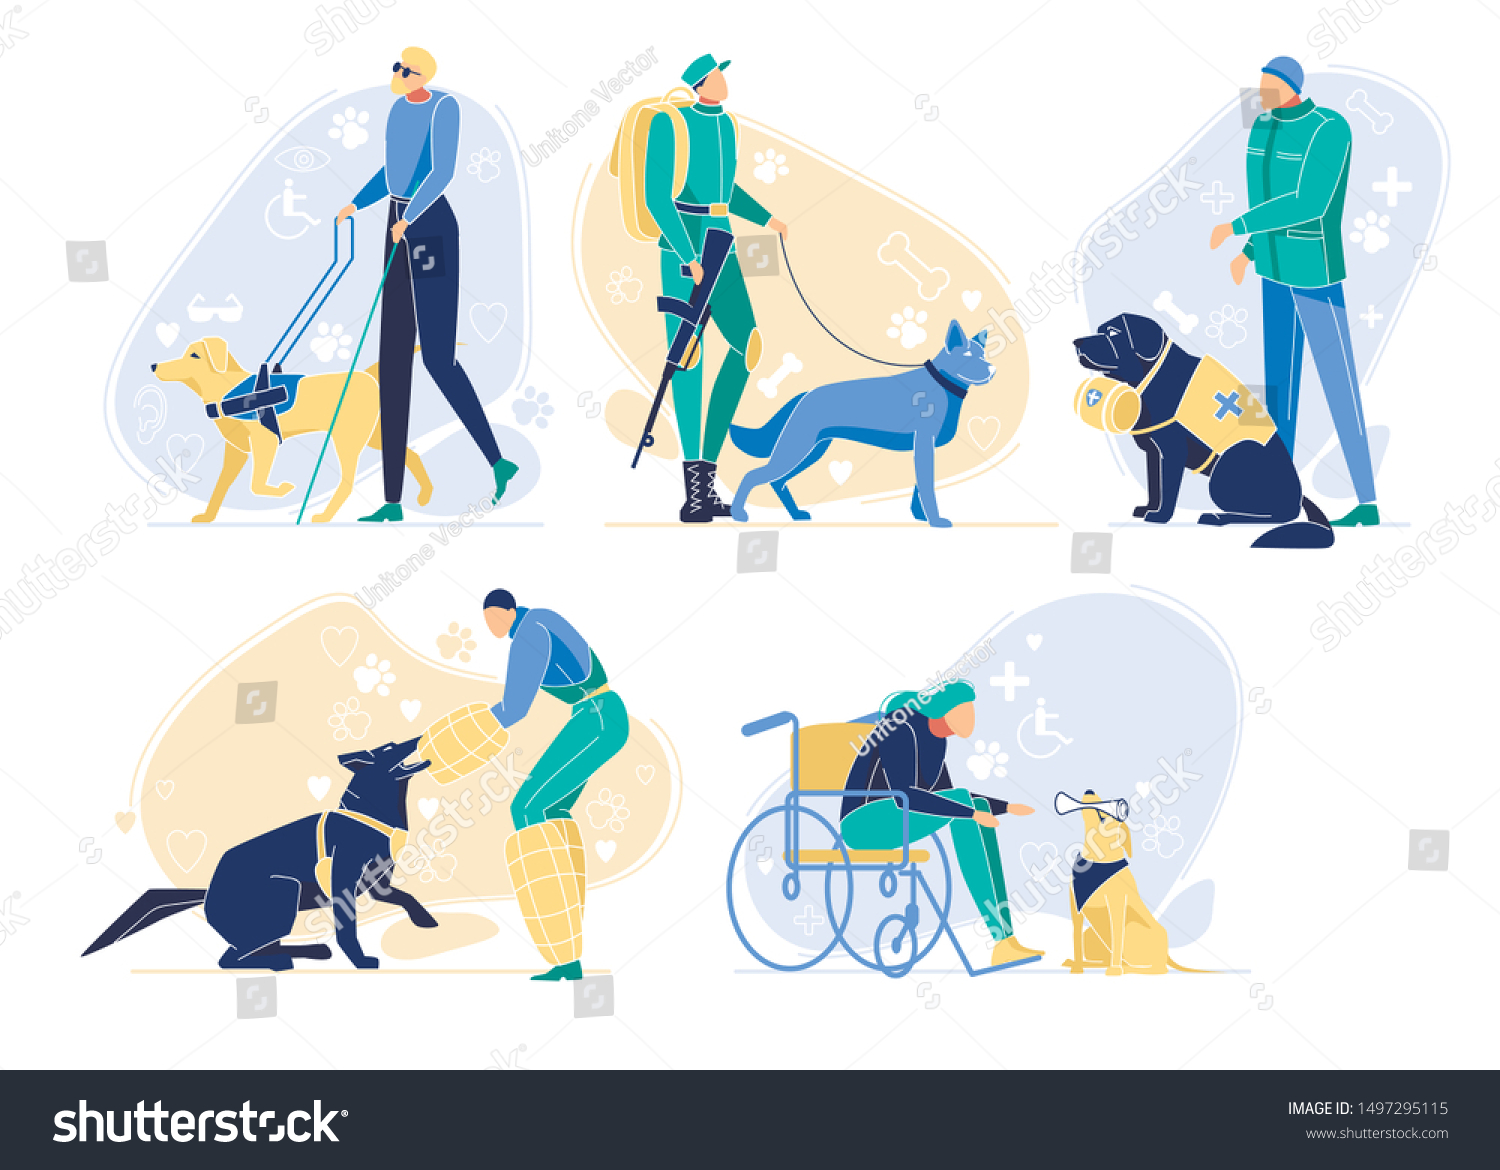 SVG of Serving Dogs with Owners Set. Pets Help People. Border Guard, Rescuer, Guide for Blind Man, Pet and Disabled Person in Wheelchair. Animals Professions in Human World. Cartoon Flat Vector Illustration svg